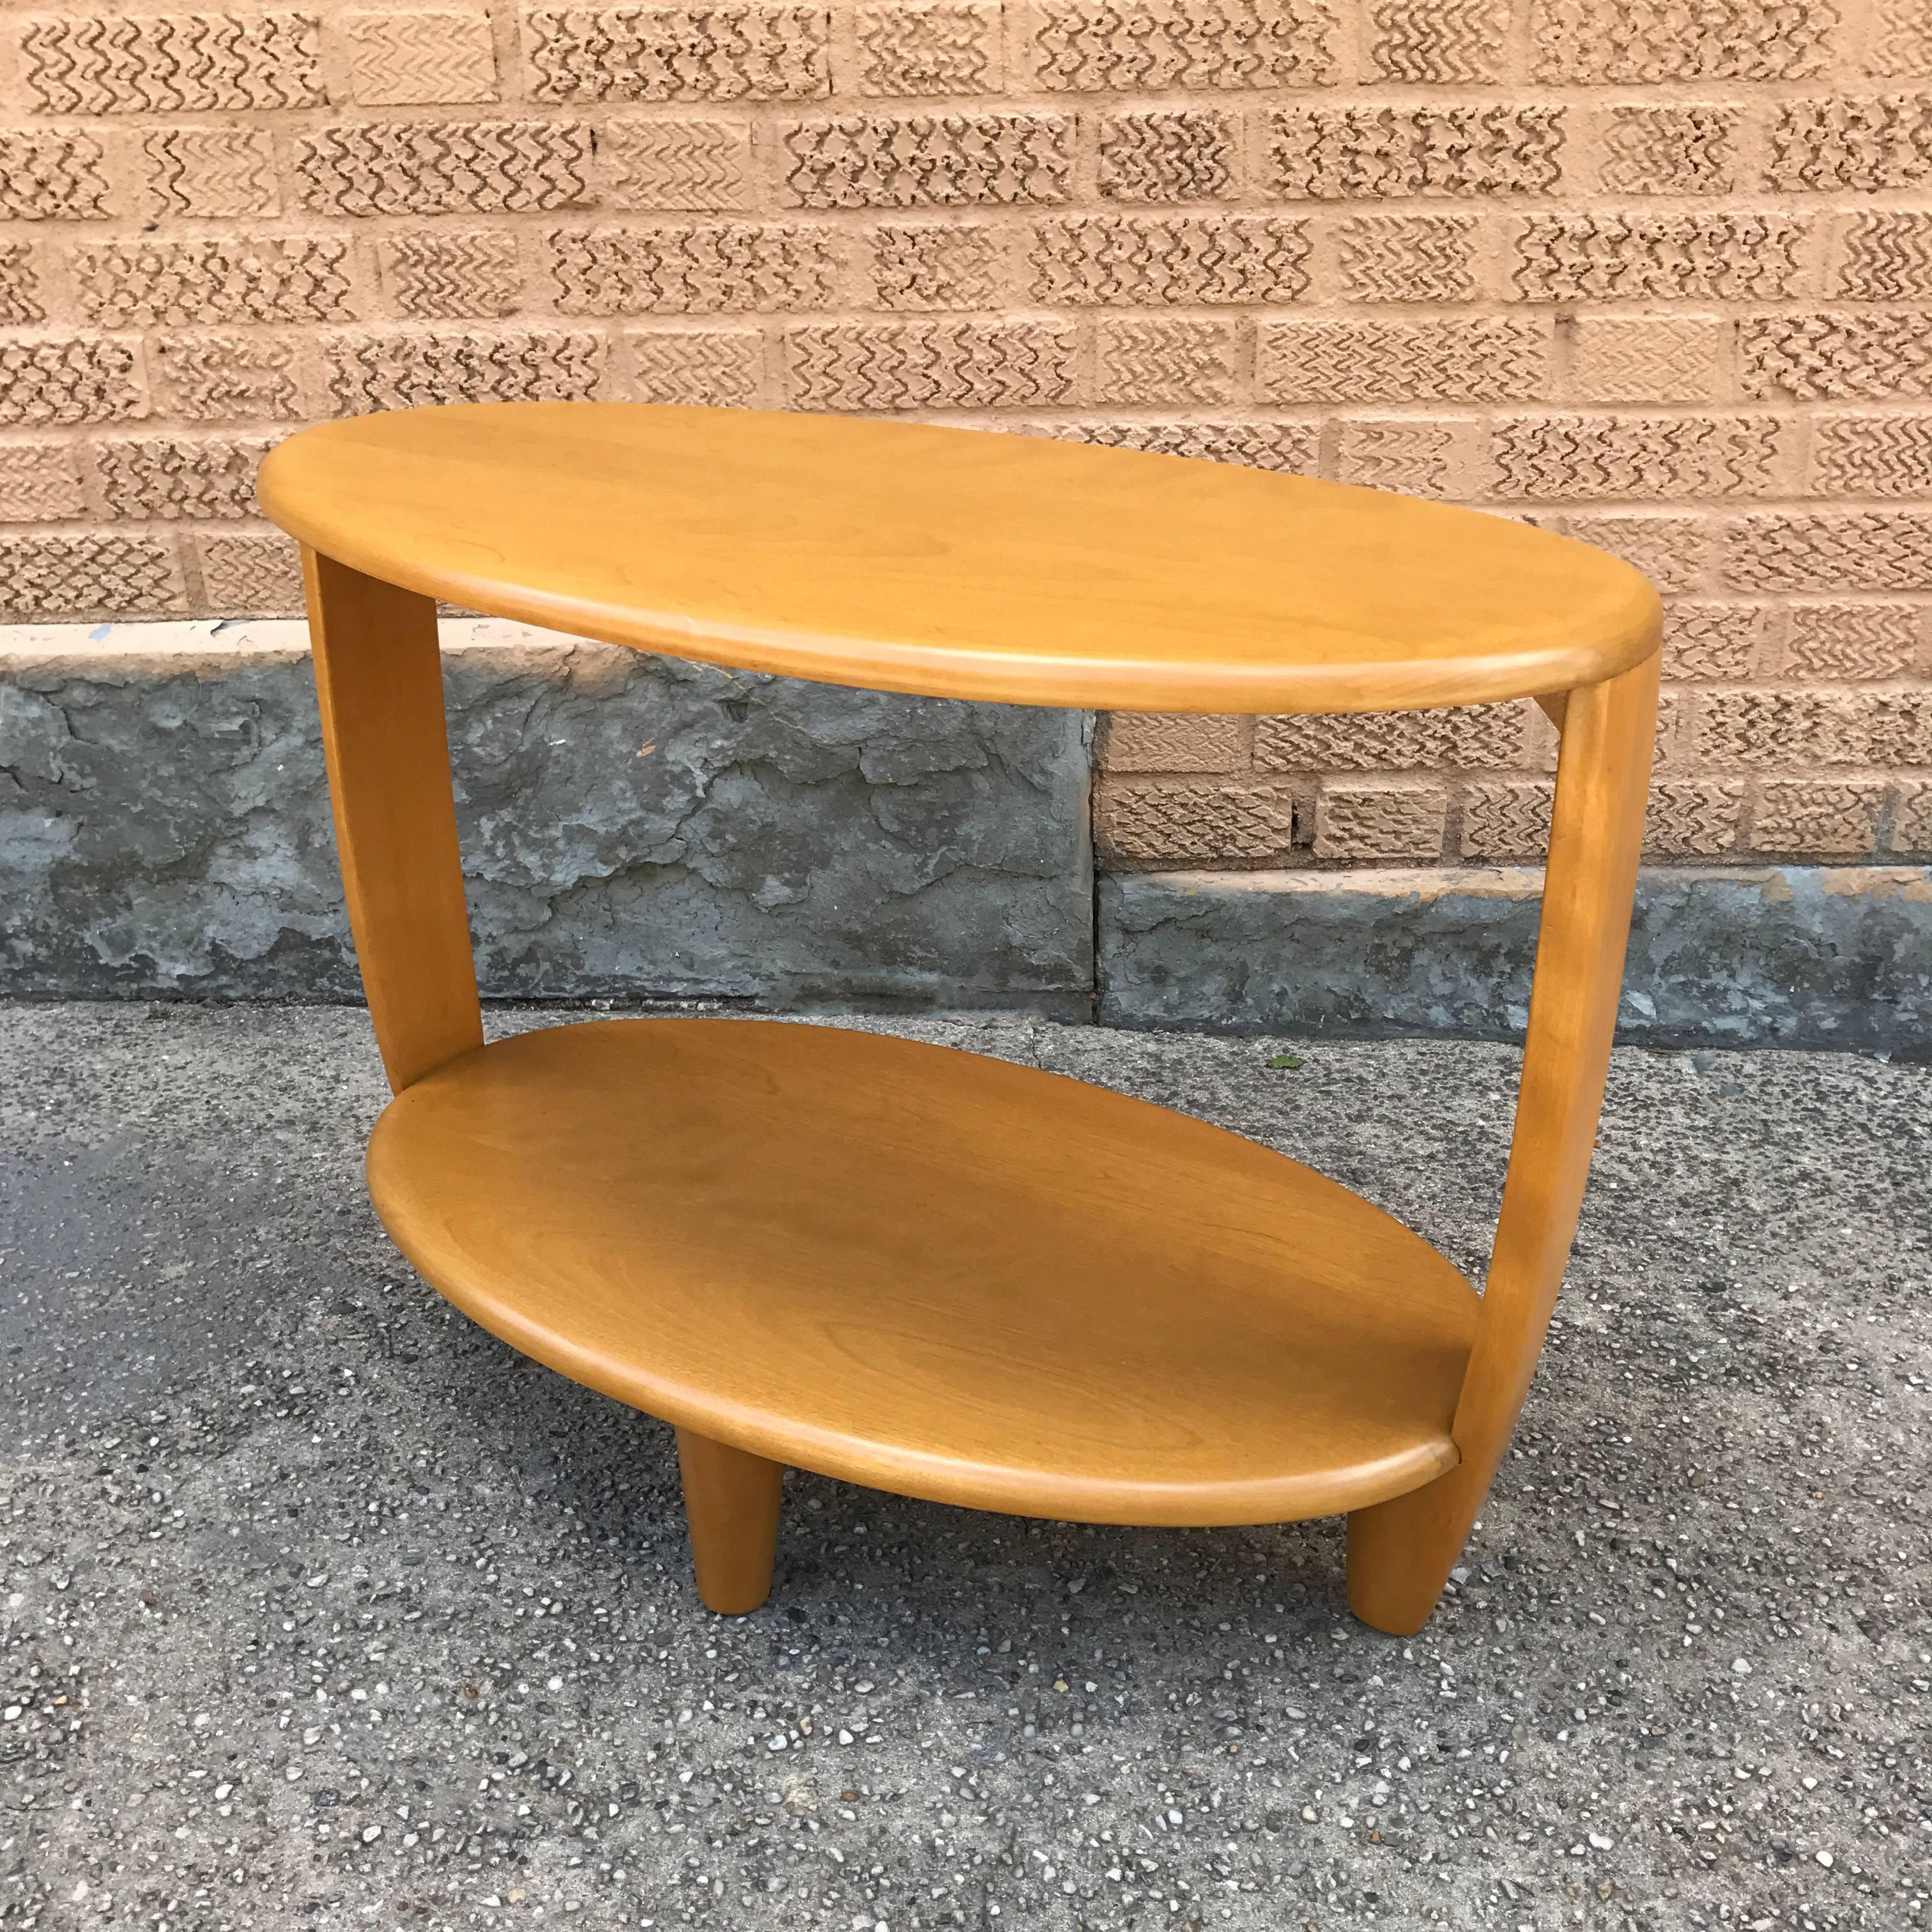 Classic Mid-Century tiered maple side or end table by Heywood Wakefield.
    